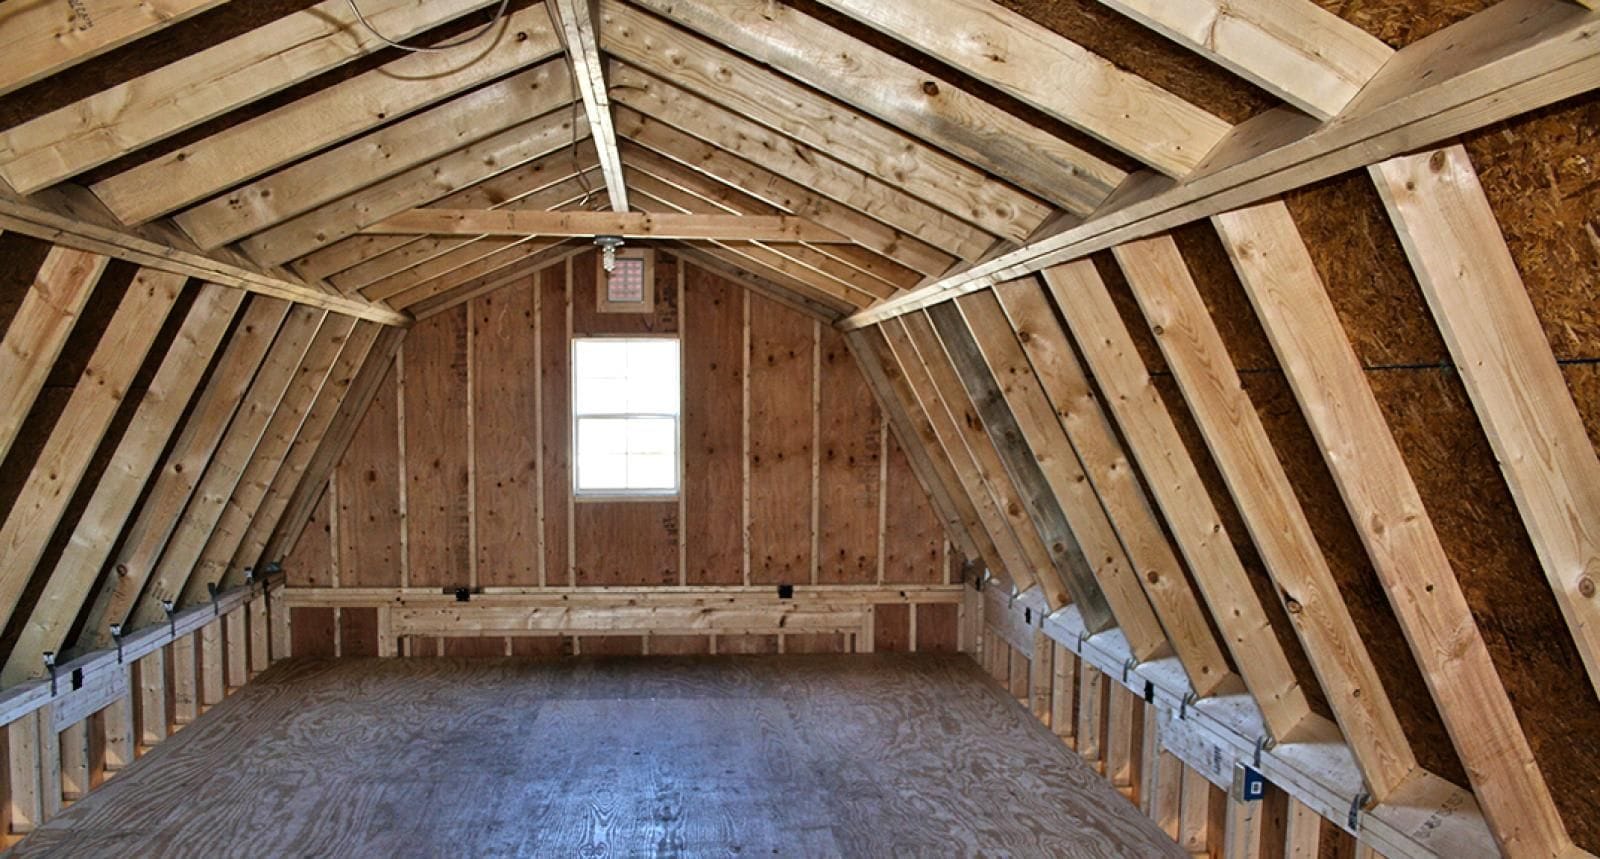 Gambrel roof design and attic space shown